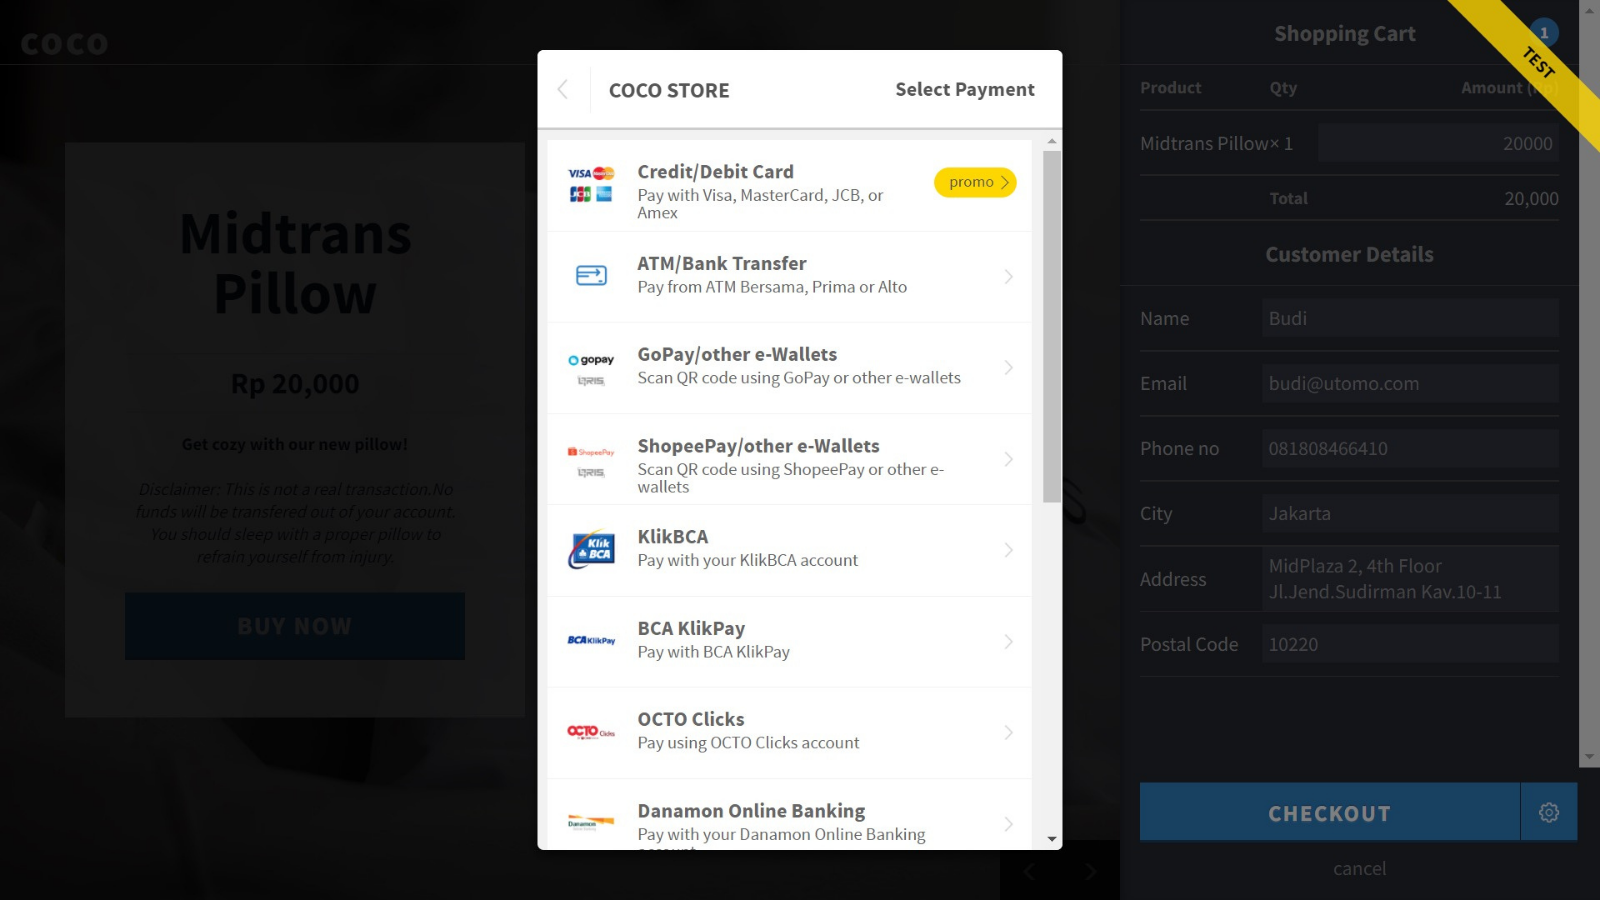 Midtrans demo checkout page to test the payment.